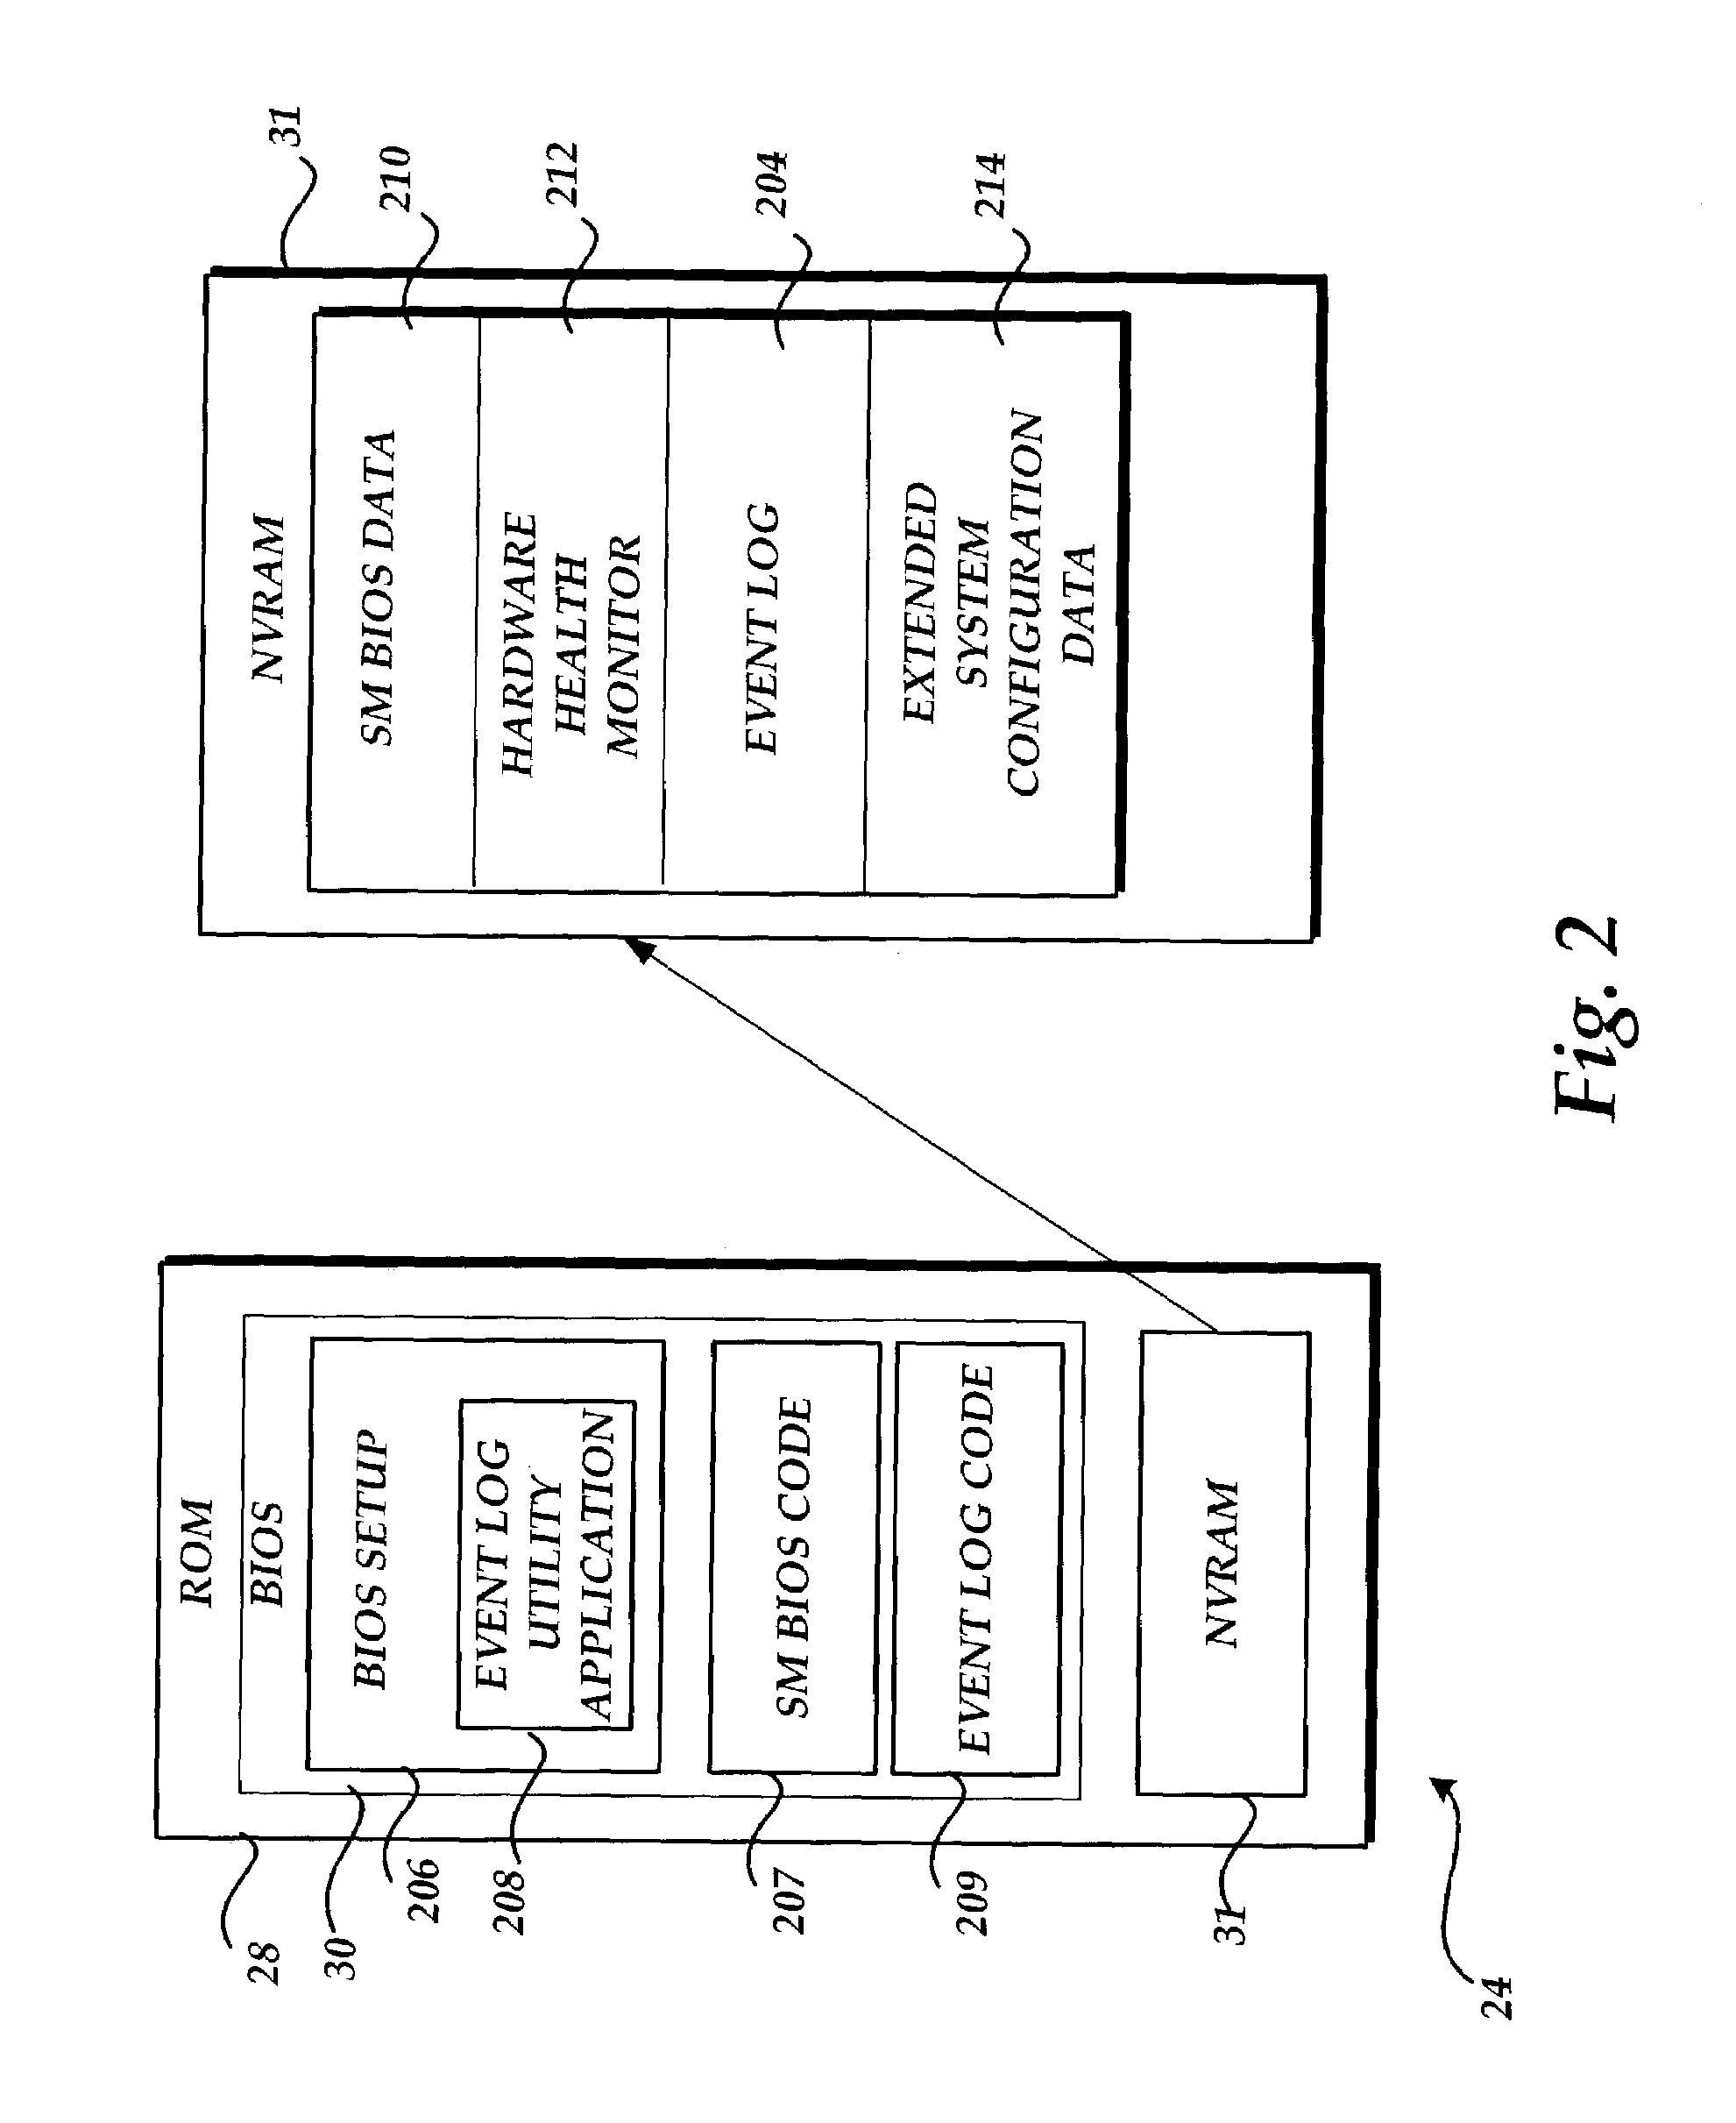 Method and system for managing the contents of an event log stored within a computer